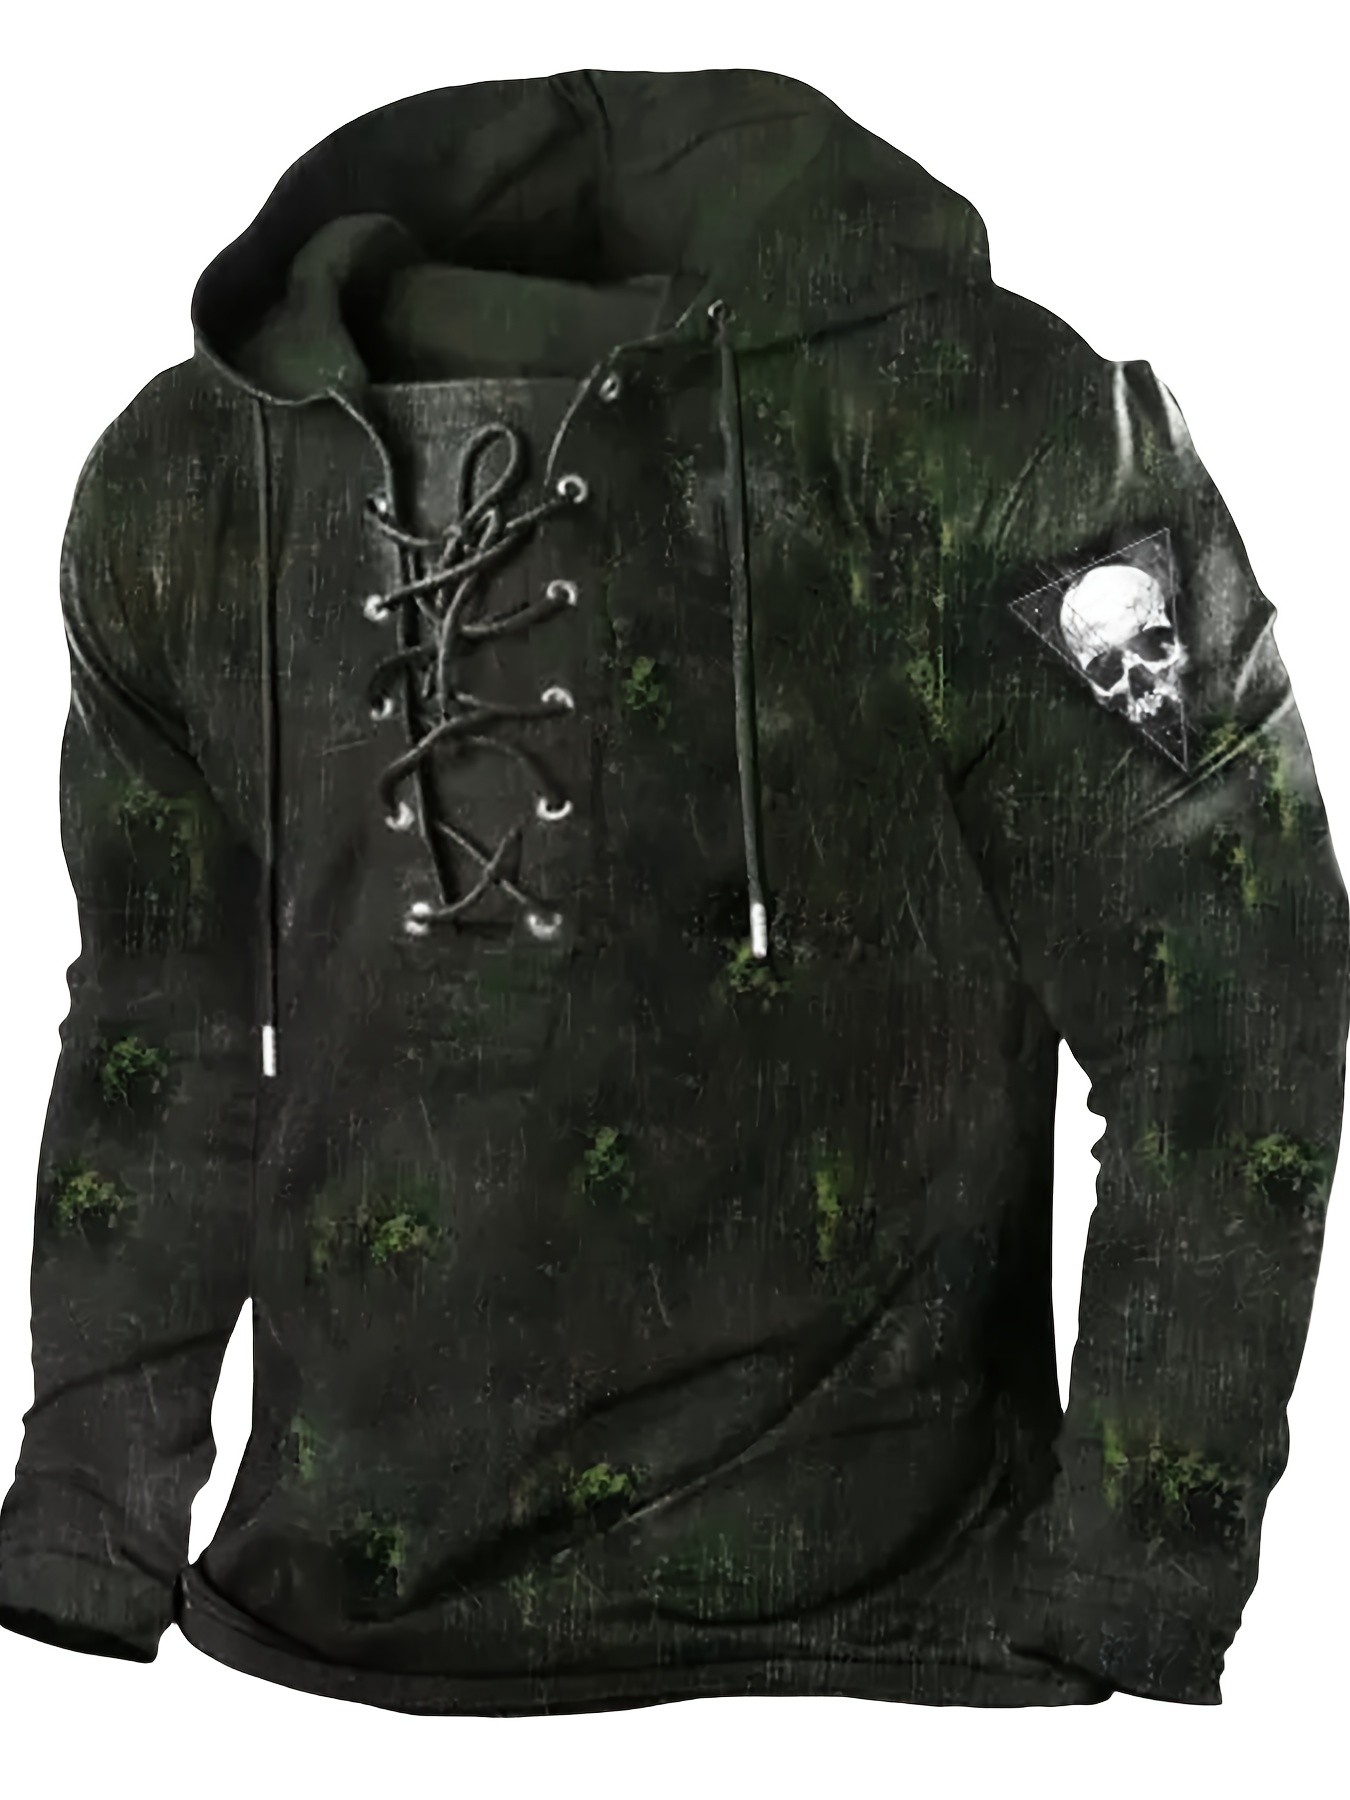 retro lace up gothic style hoodies for men mens casual graphic design hooded sweatshirt streetwear for winter fall as gifts details 3